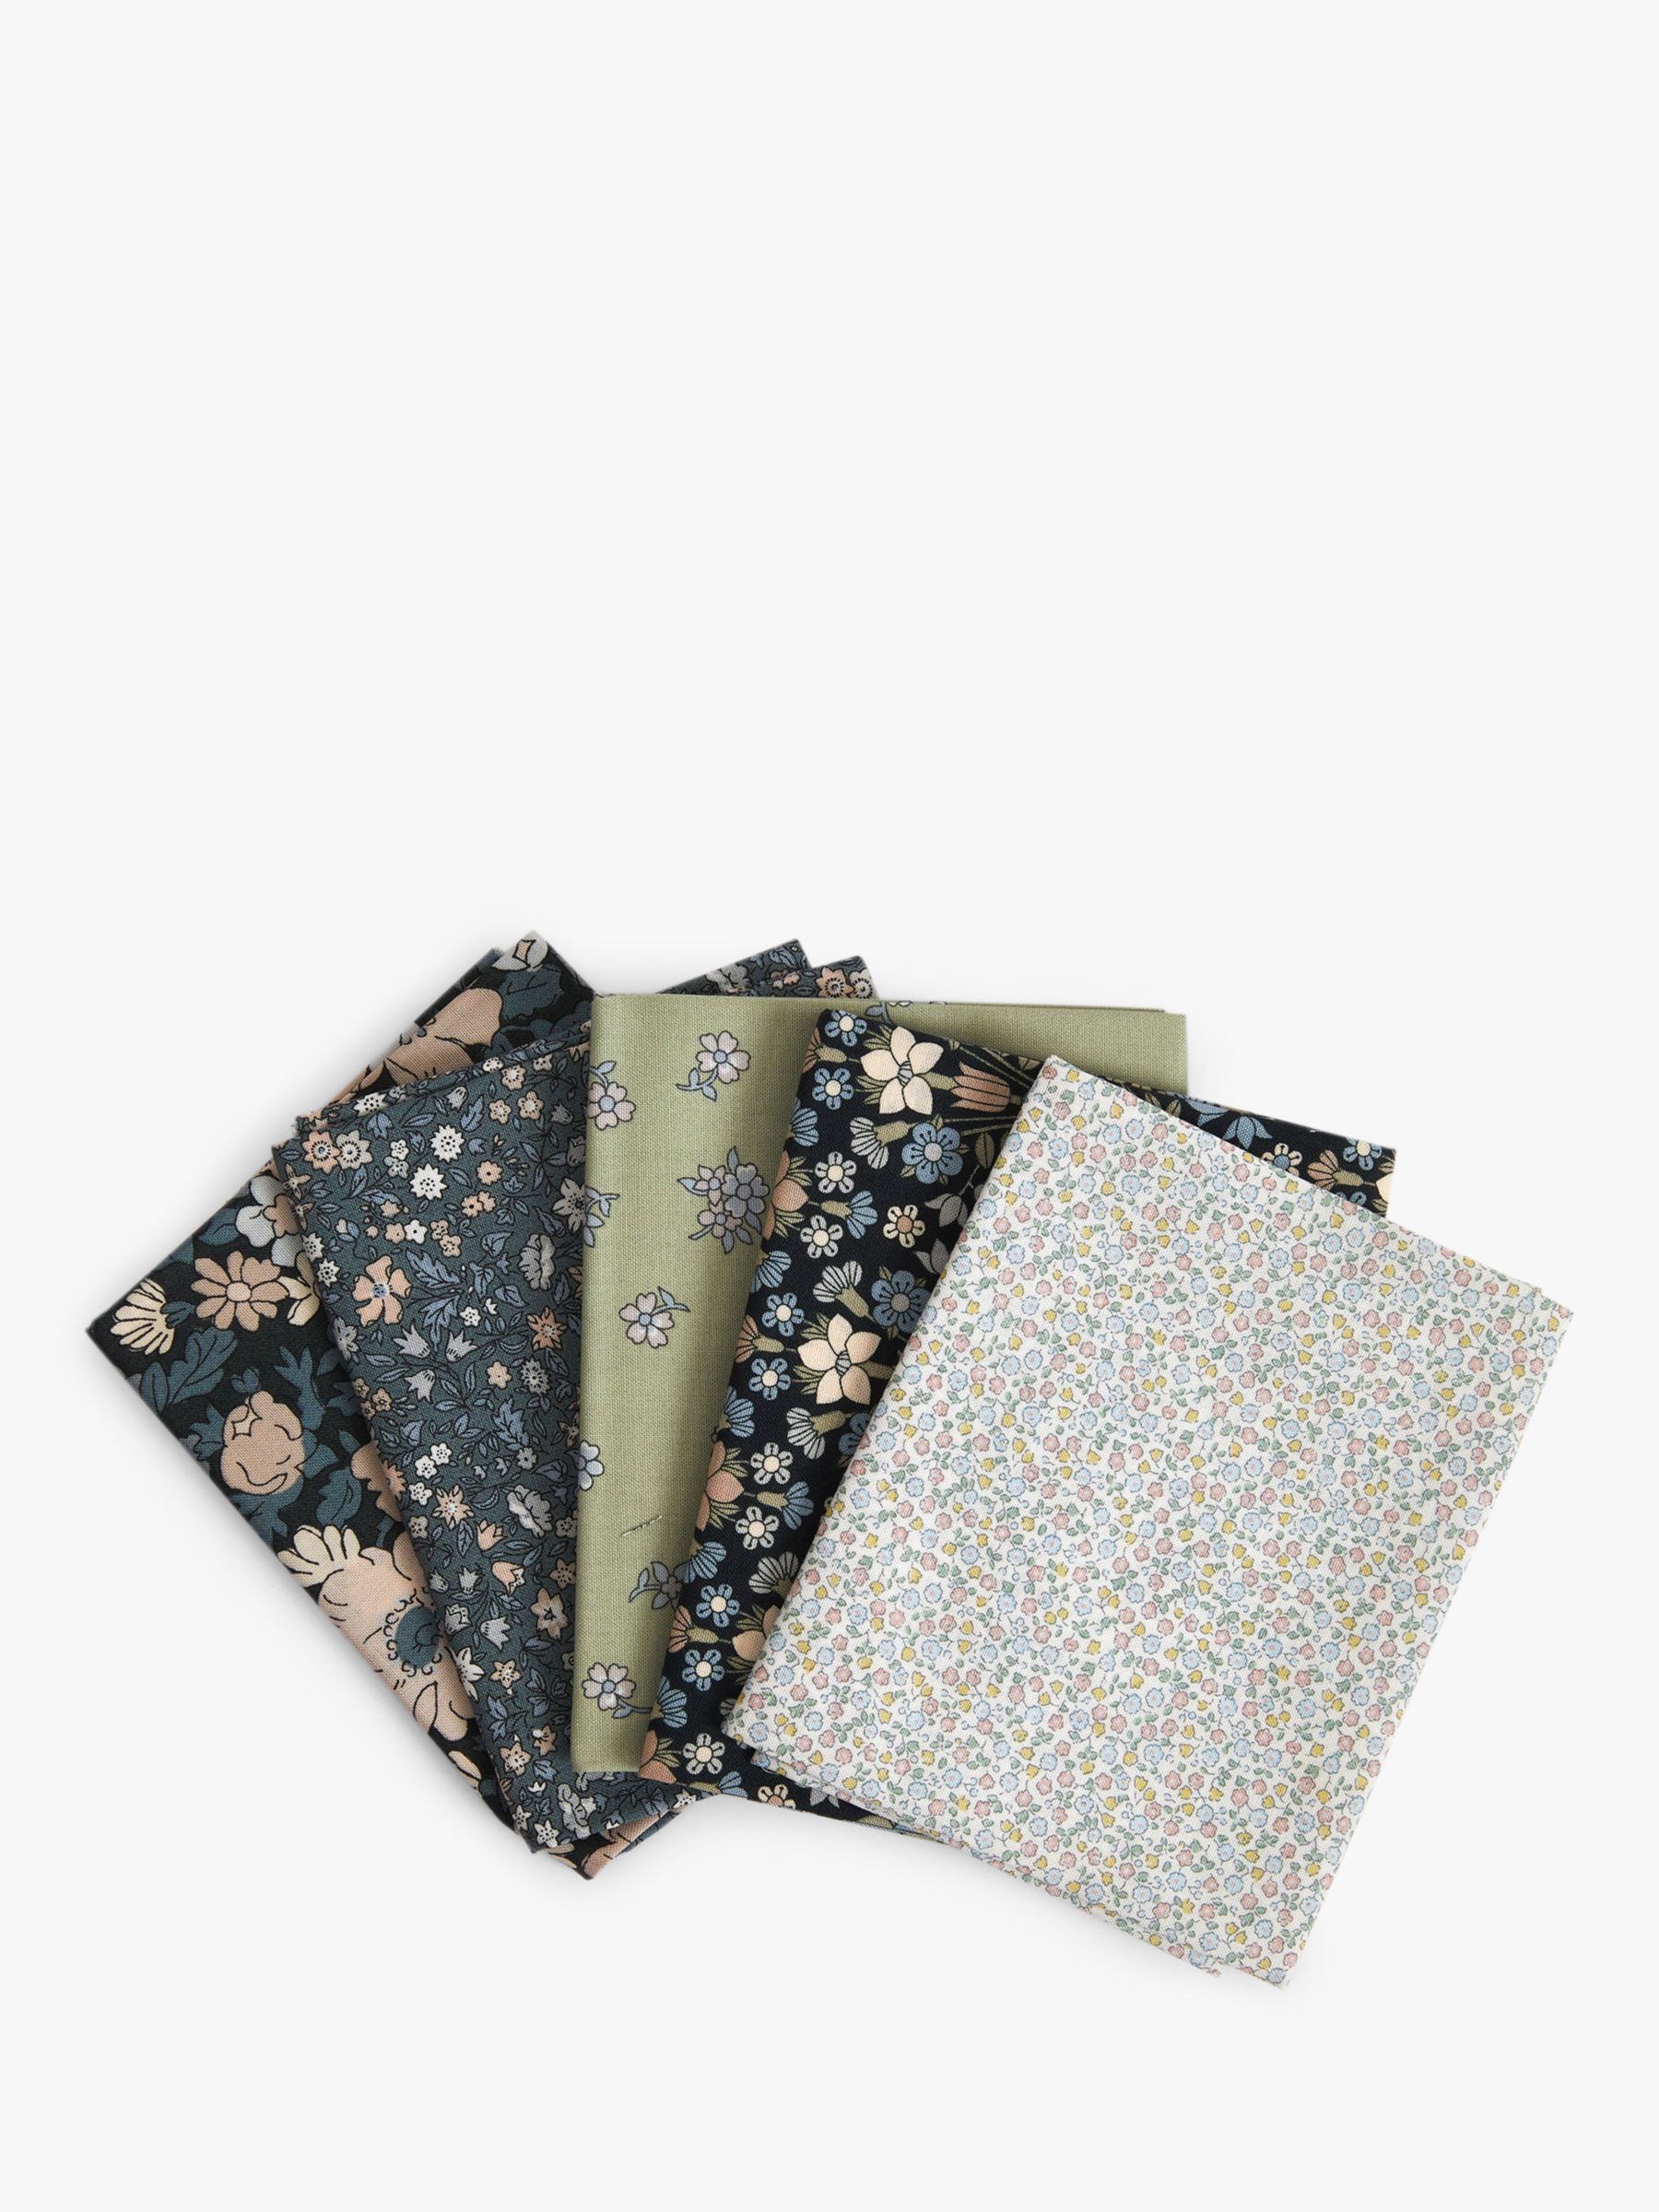 Where to Buy Liberty Fabric on Sale